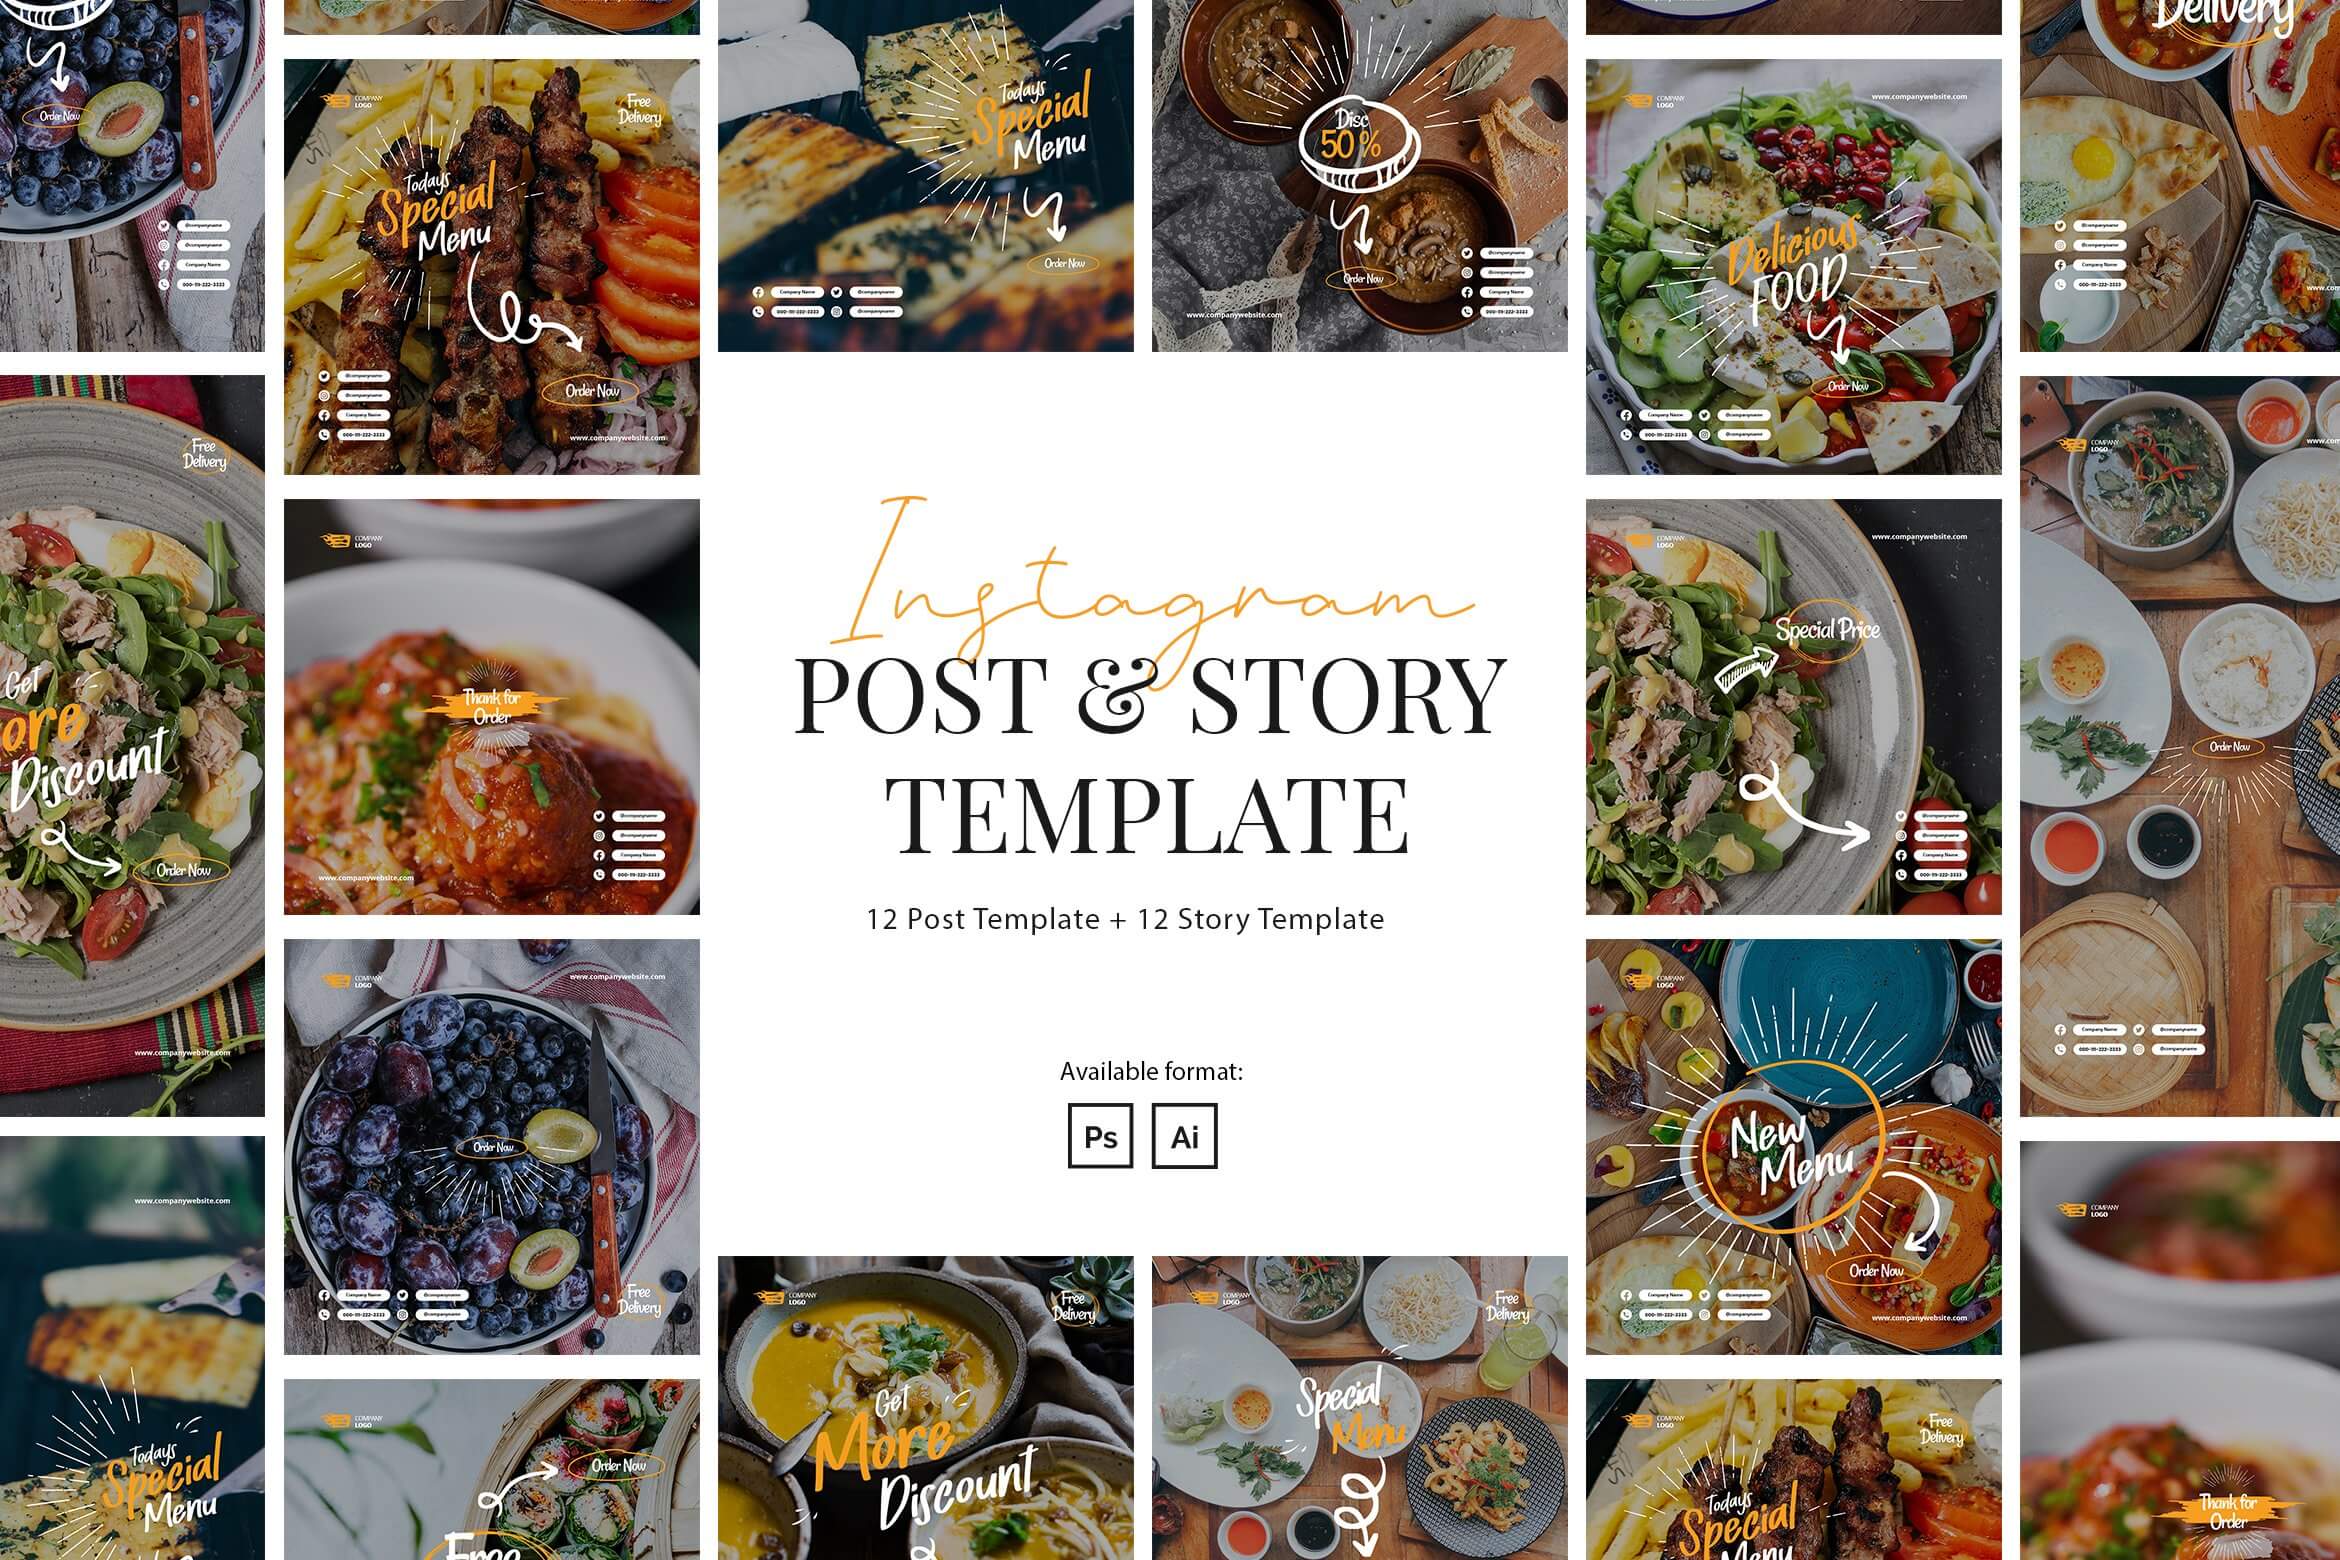 bundle restaurant food instagram awesome food theme example.